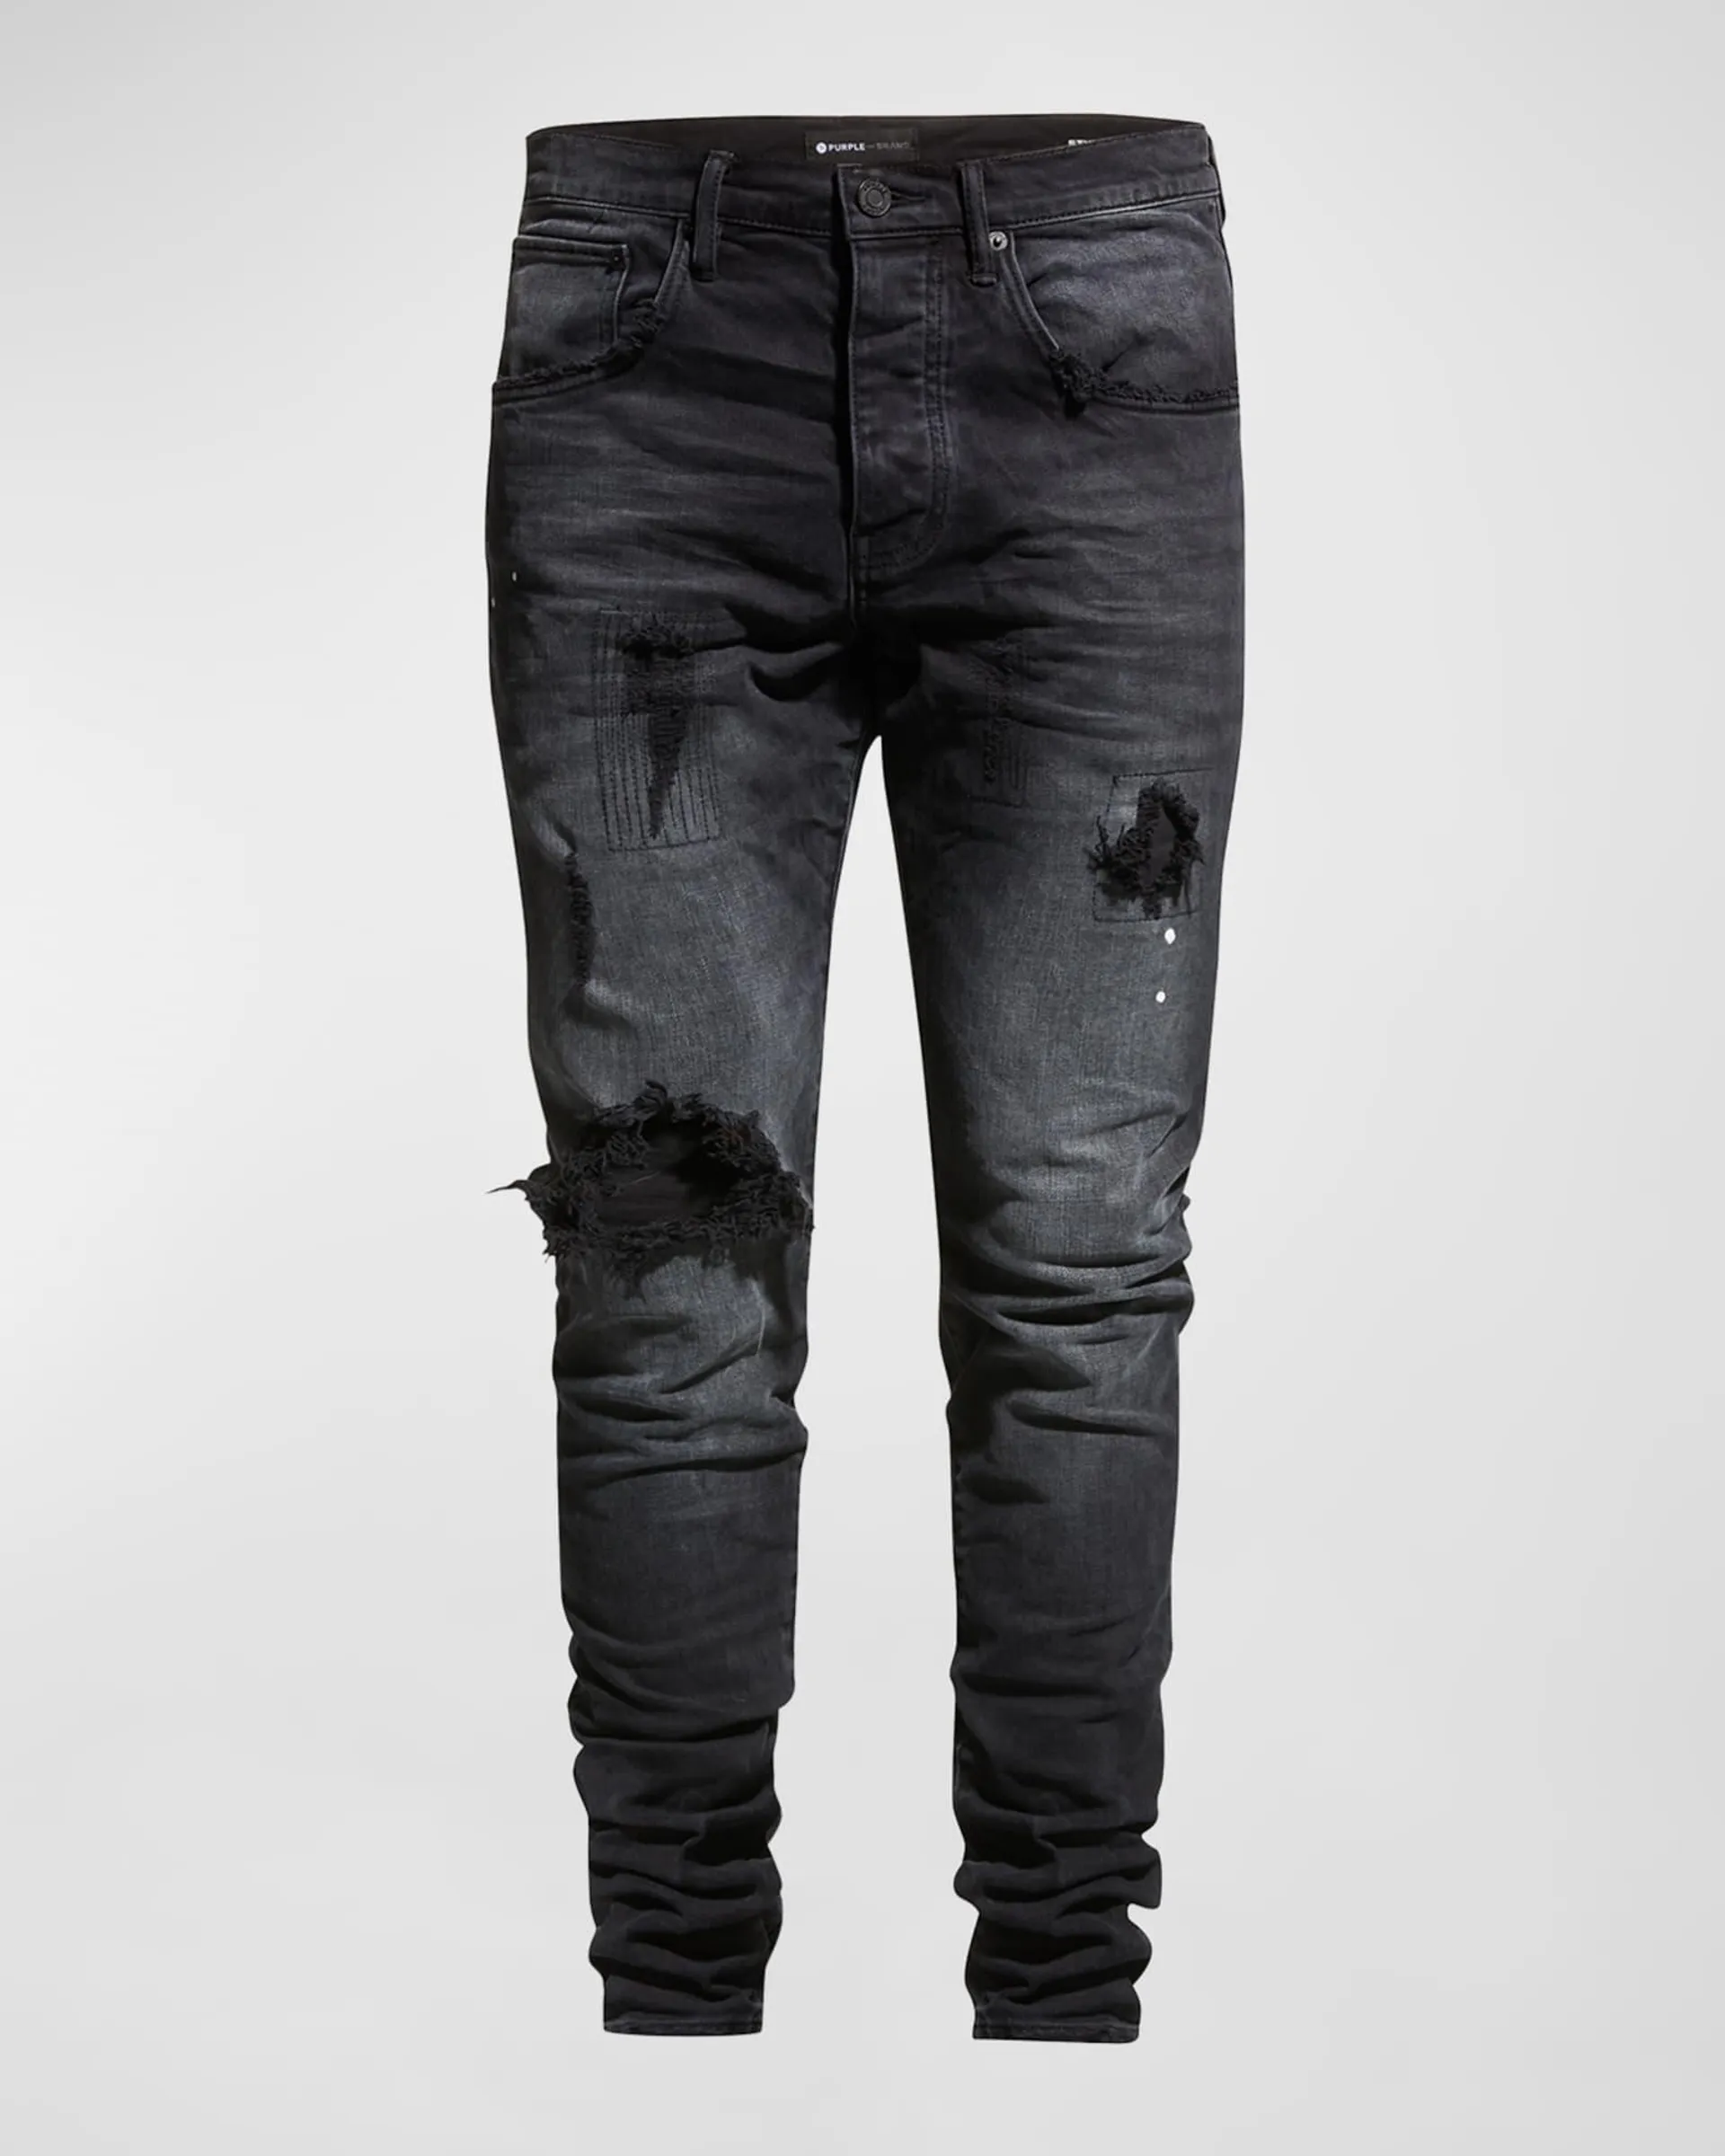 Men's Dropped-Fit Distressed Resin Jeans